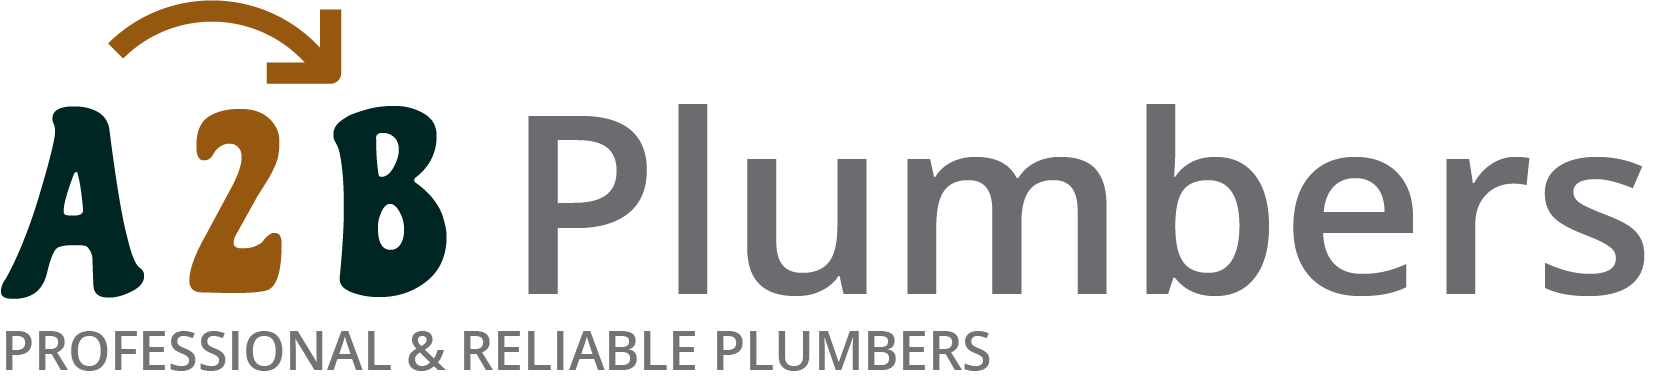 If you need a boiler installed, a radiator repaired or a leaking tap fixed, call us now - we provide services for properties in Burnham and the local area.